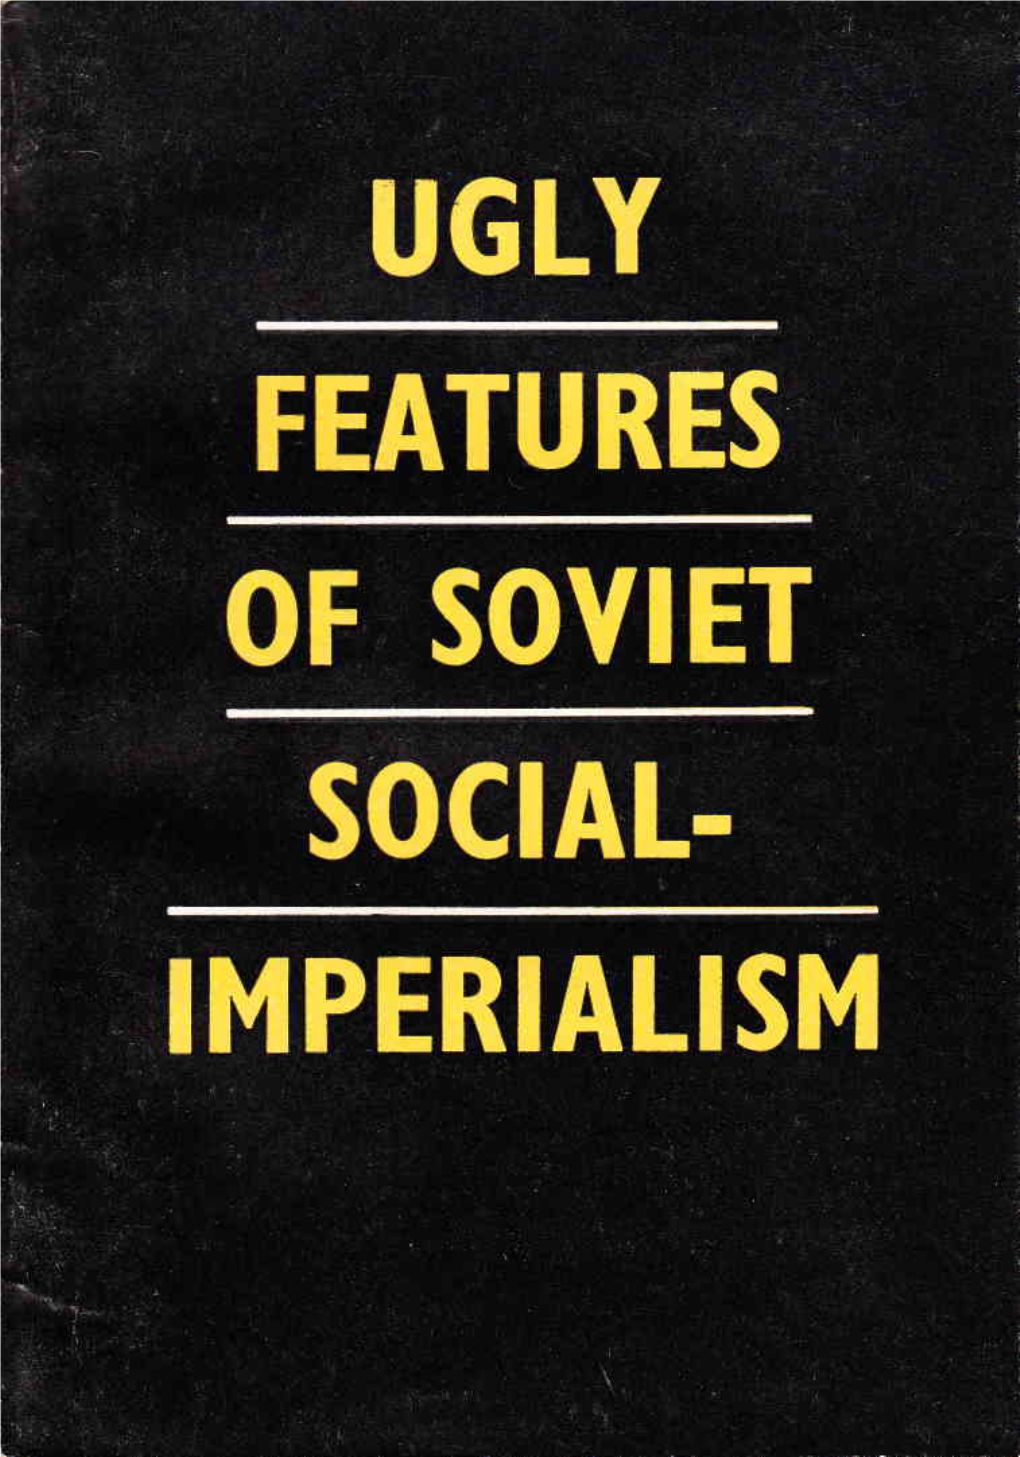 Ugly Features of Soviet Social-Imperialism